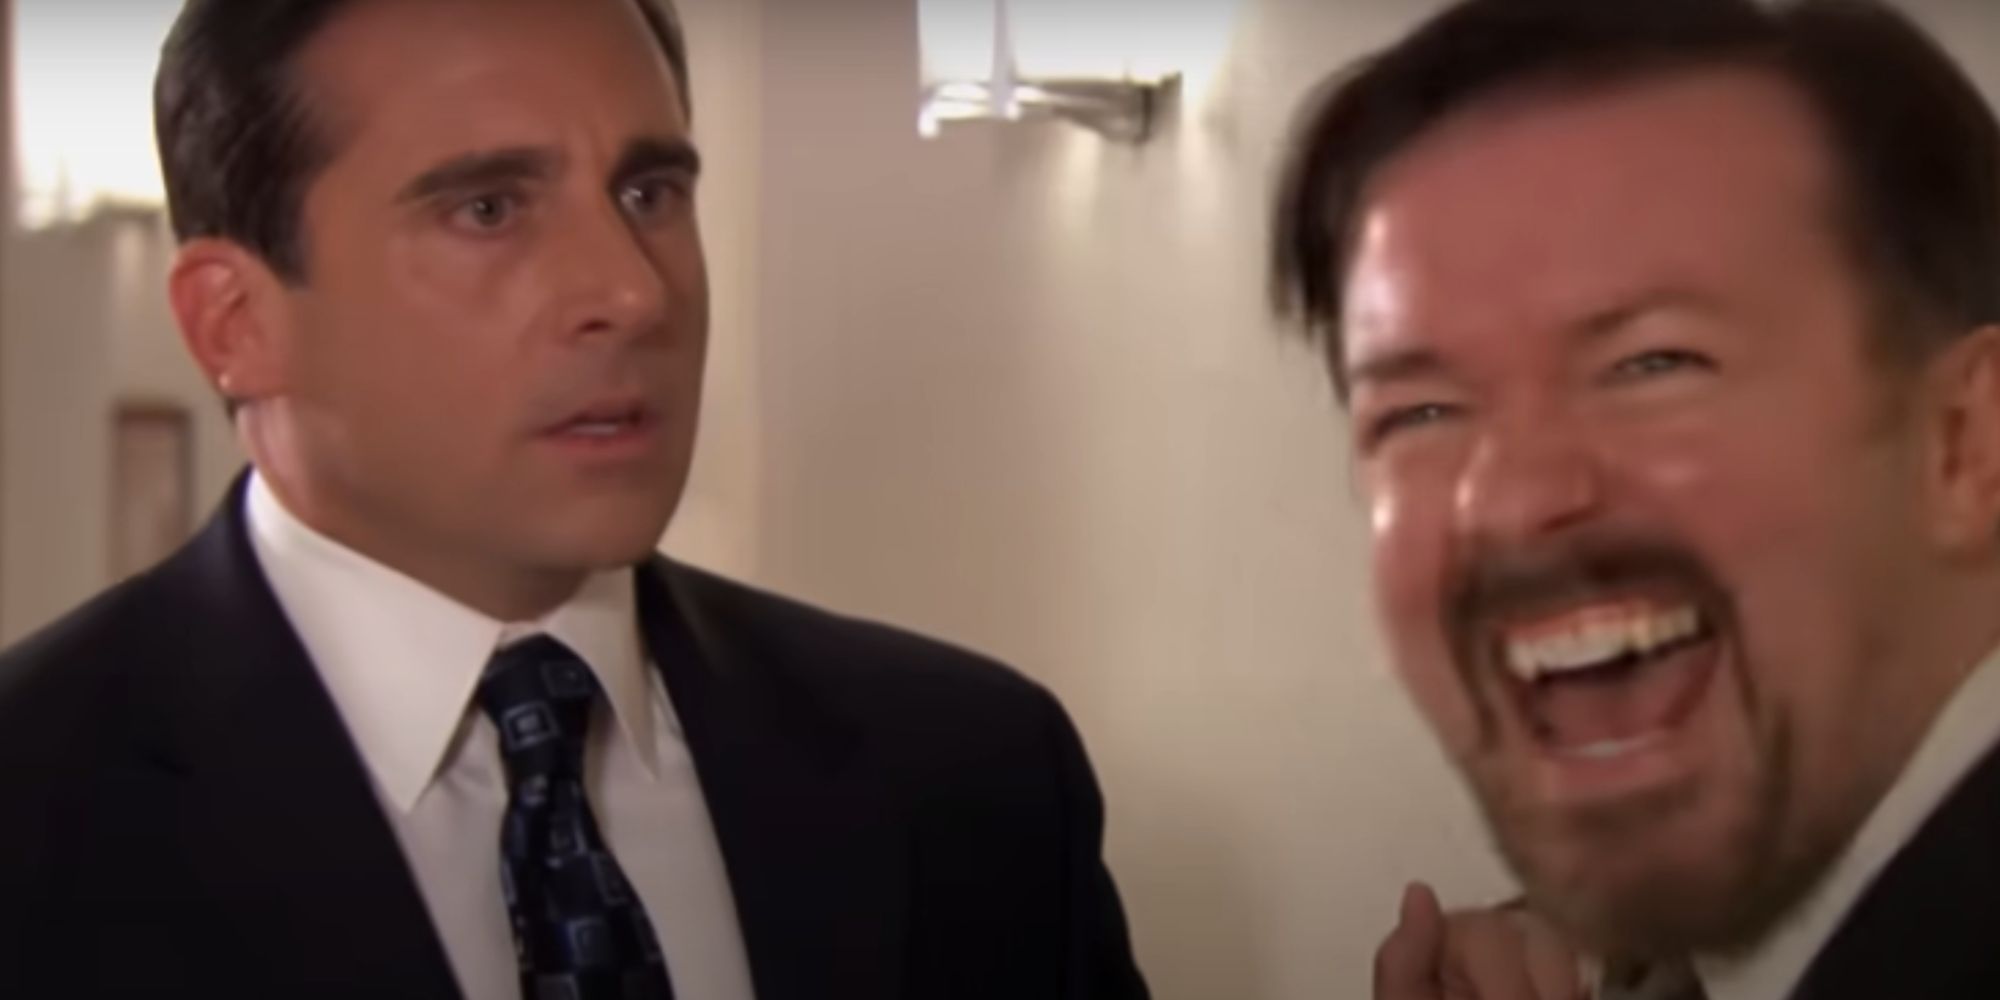 Steve Carrell as Michael Scott staring at Ricky Gervais as David Brent in The Office